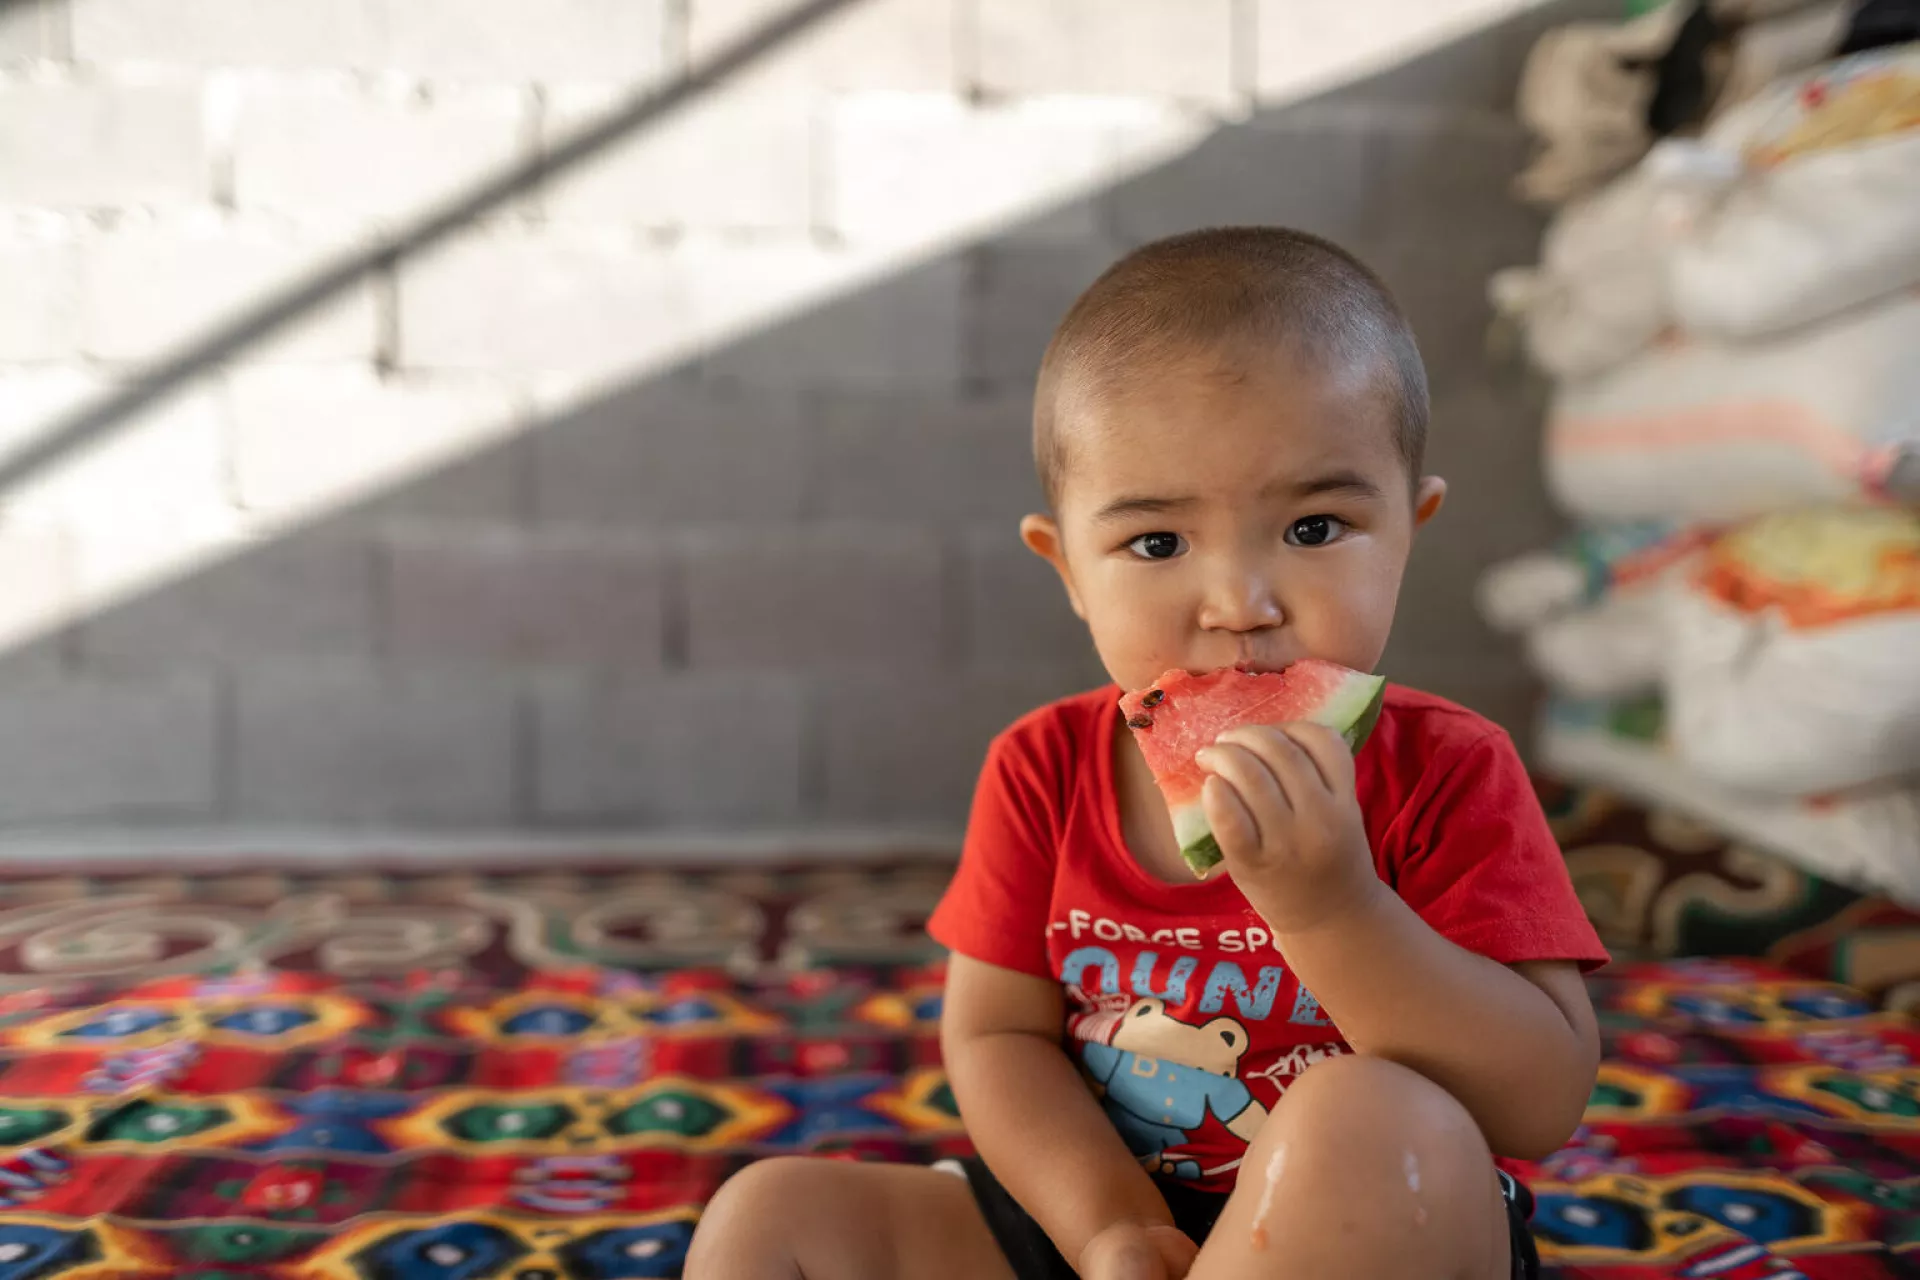           a two years old child, eating watermelon